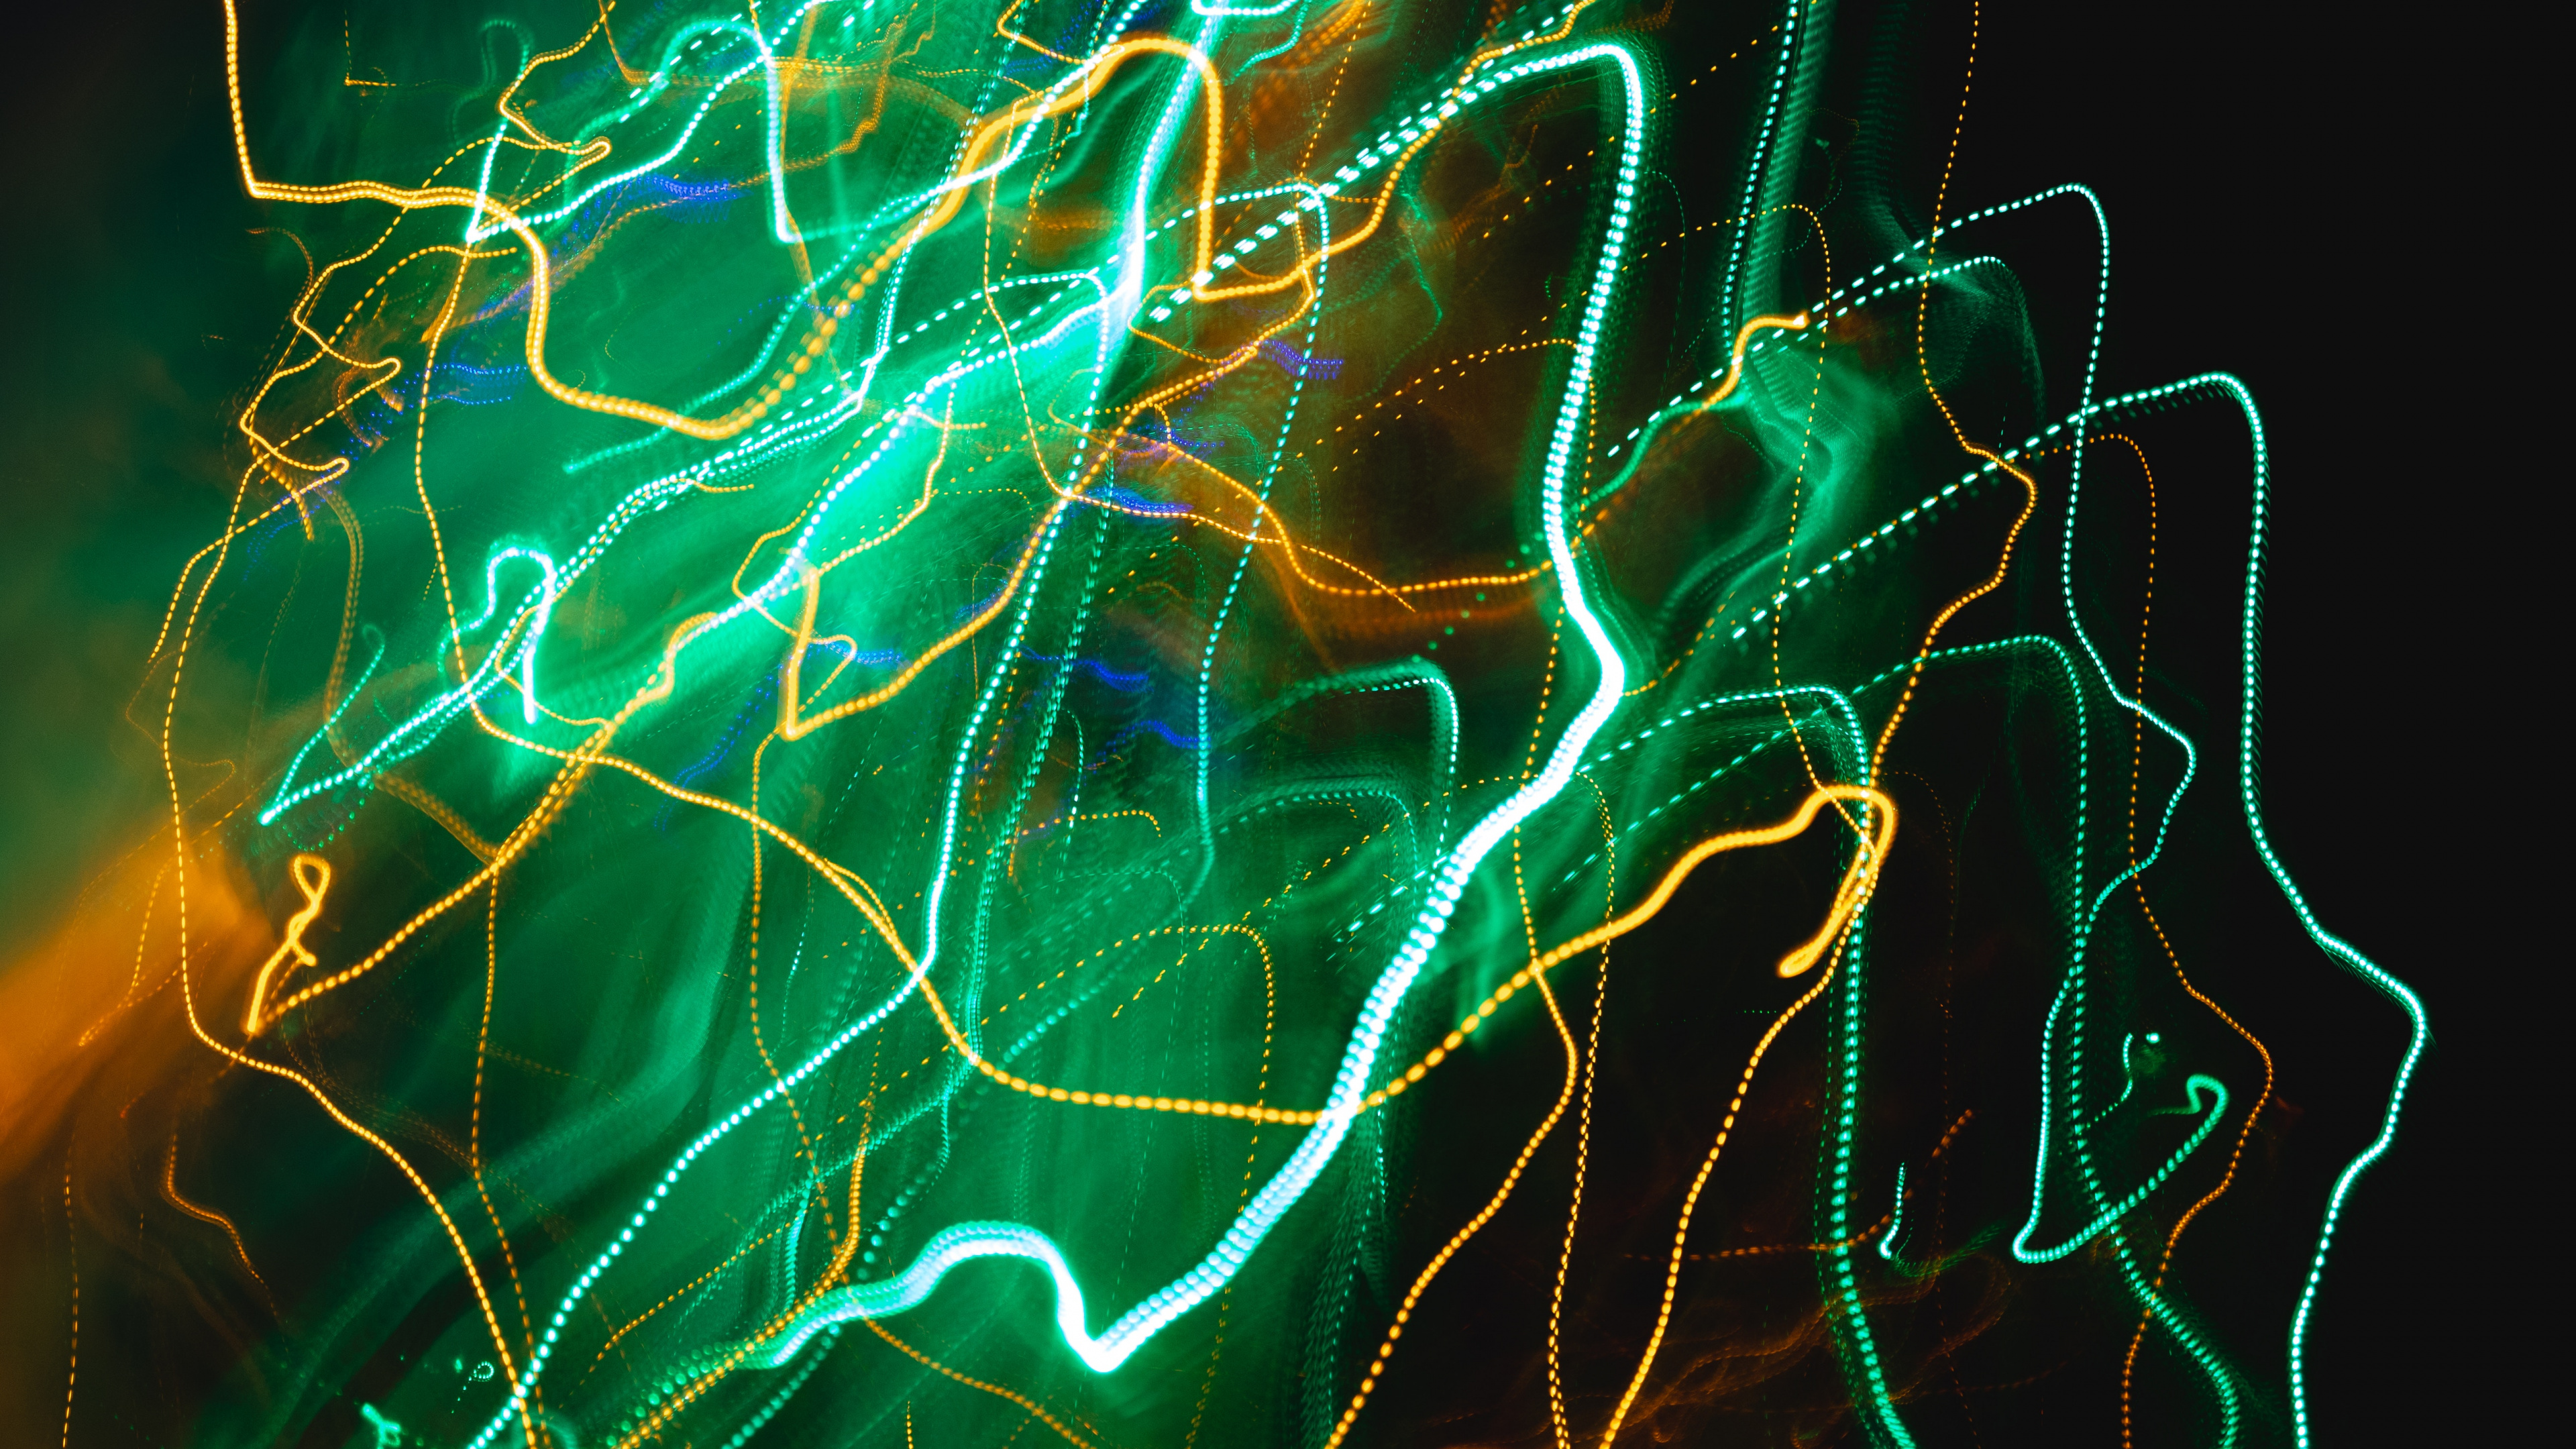 Green and Blue Abstract Painting. Wallpaper in 3840x2160 Resolution